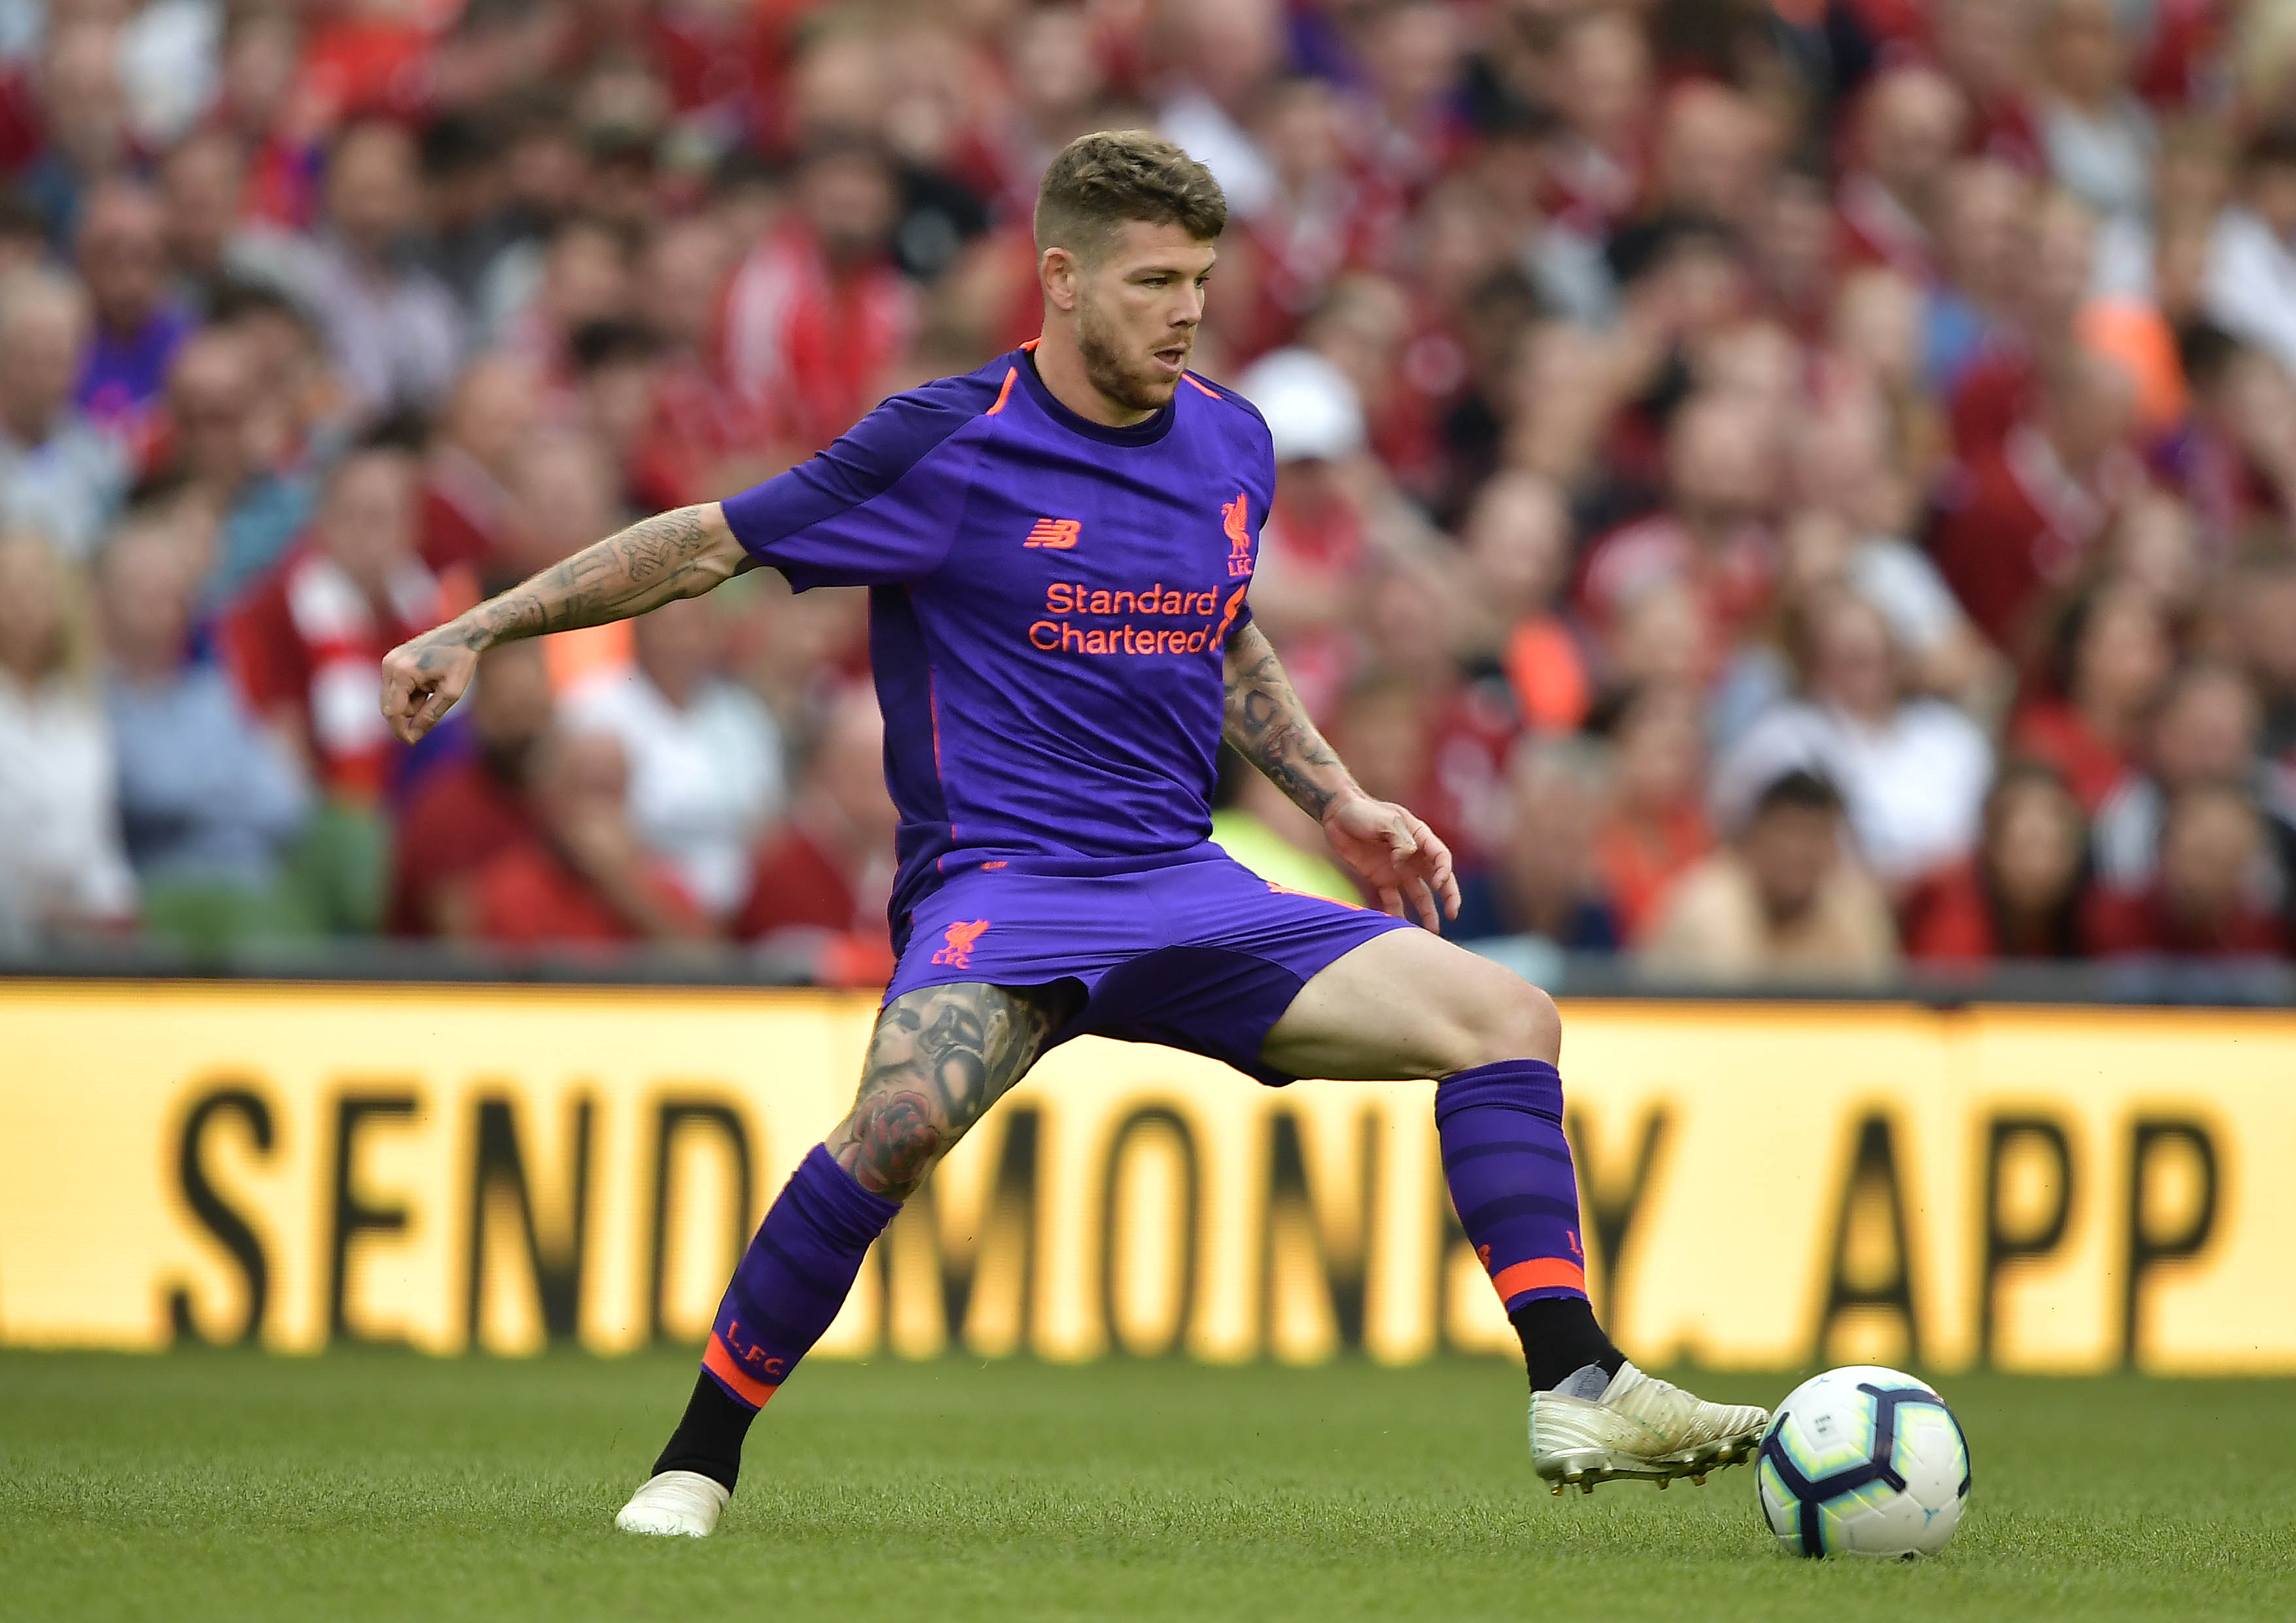 DUBLIN, IRELAND - AUGUST 04: Alberto Moreno of Liverpool during the international friendly game between Liverpool and Napoli at Aviva Stadium on August 4, 2018 in Dublin, Ireland. (Photo by Charles McQuillan/Getty Images)